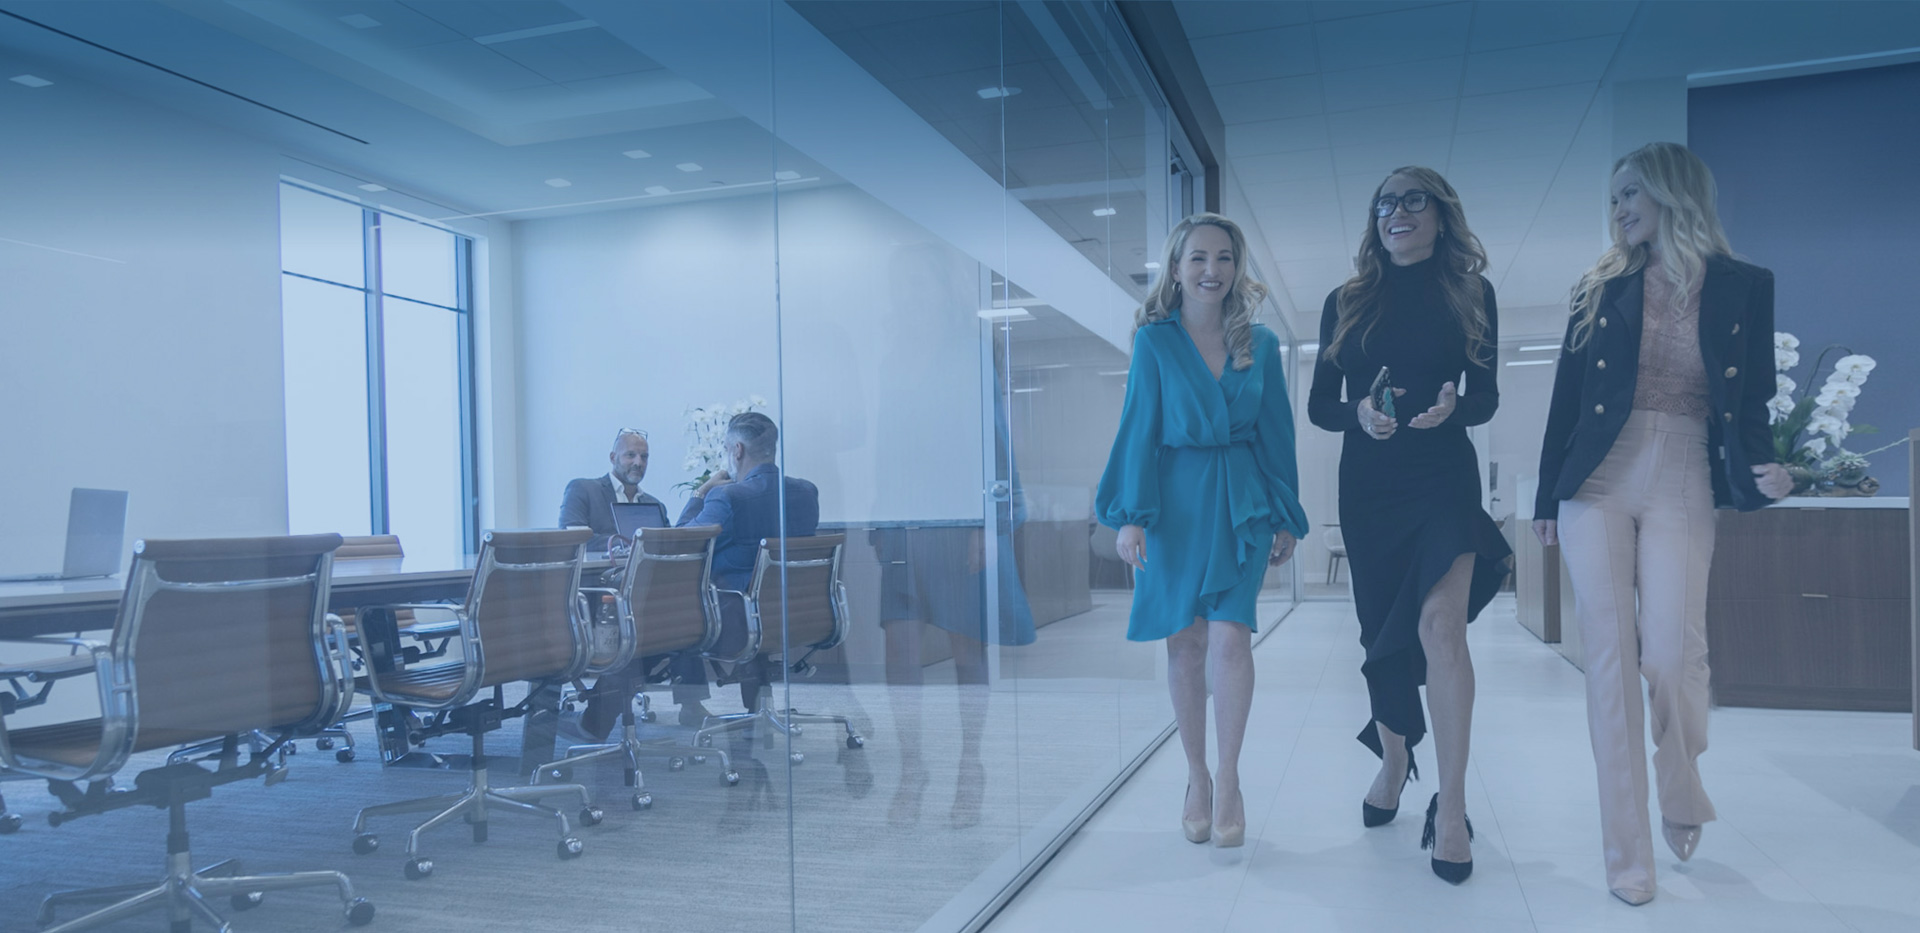 Three business women walking in a glass office, in the style of dark teal and light gray, highly staged scenes, smilecore, immersive environments, precisionist style, meticulously crafted scenes, rich and immersive